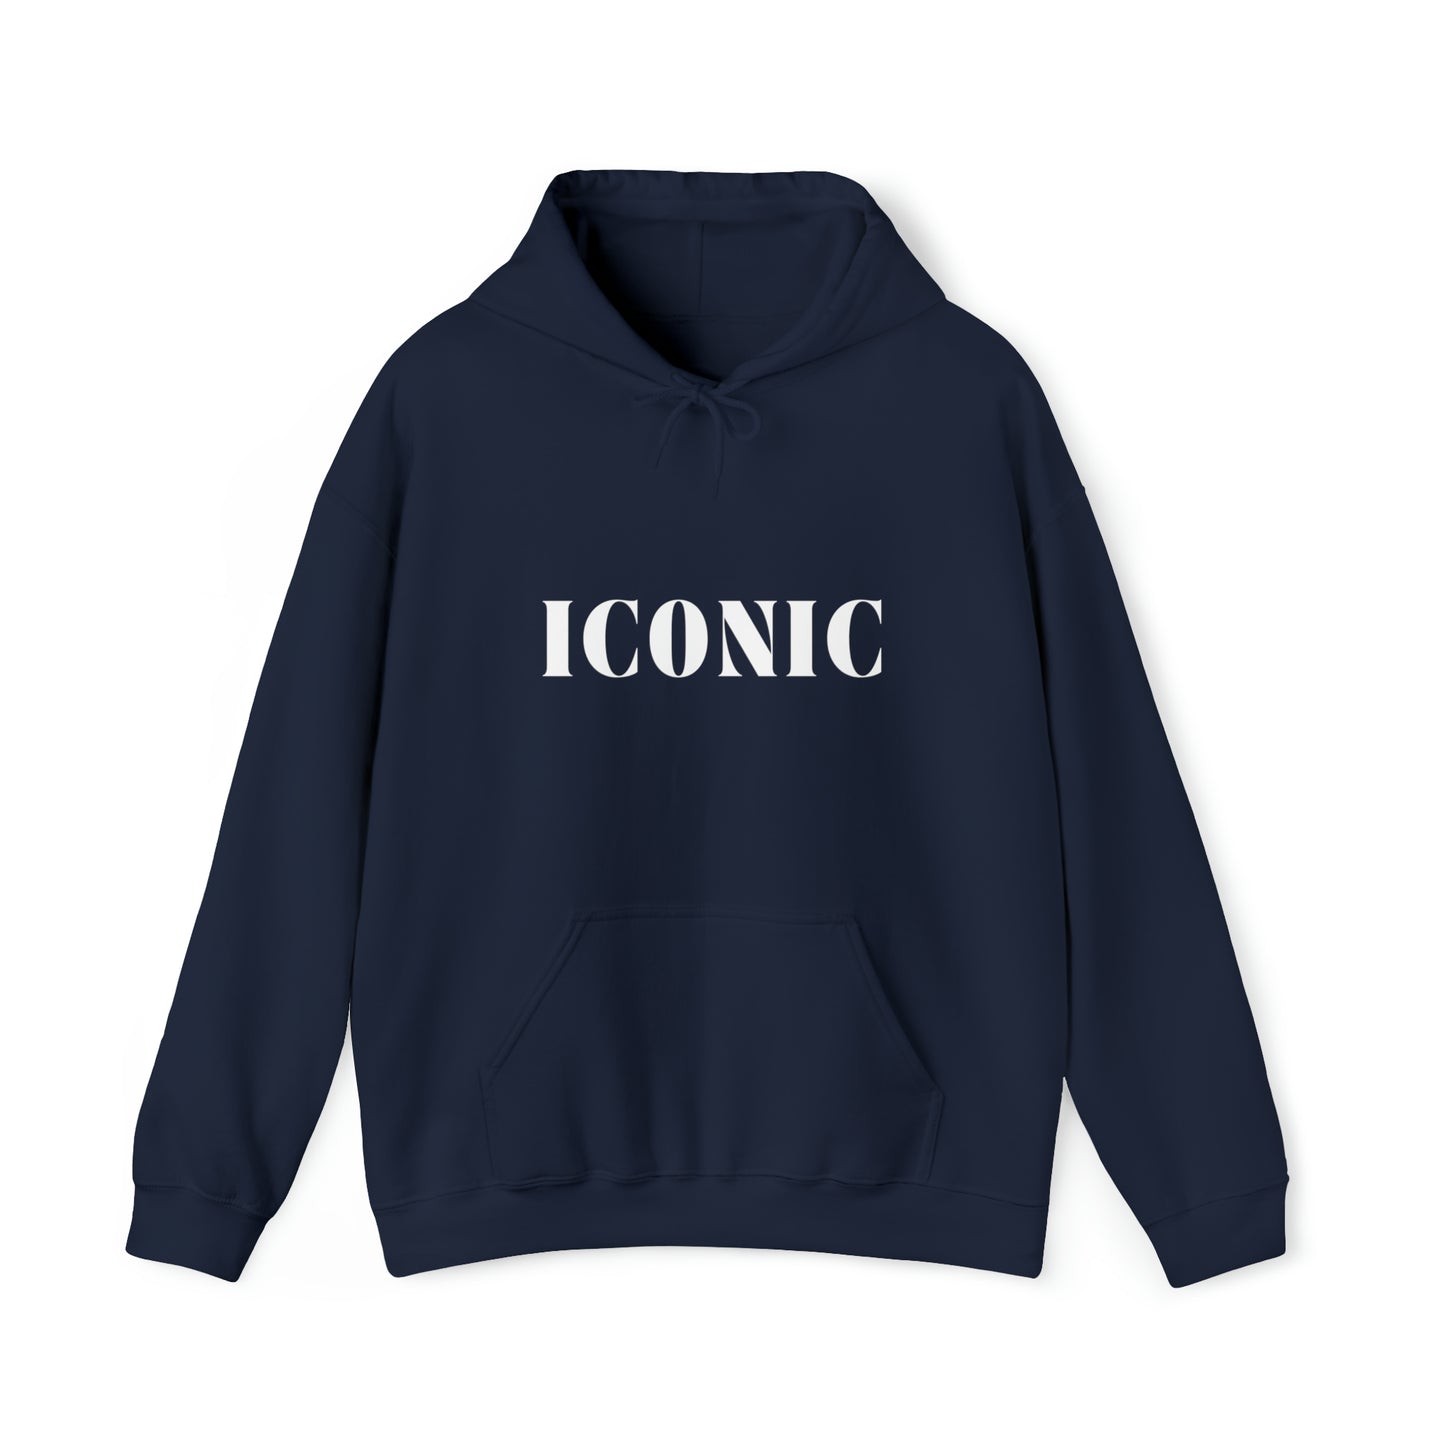 S Navy Iconic Hoodie from HoodySZN.com